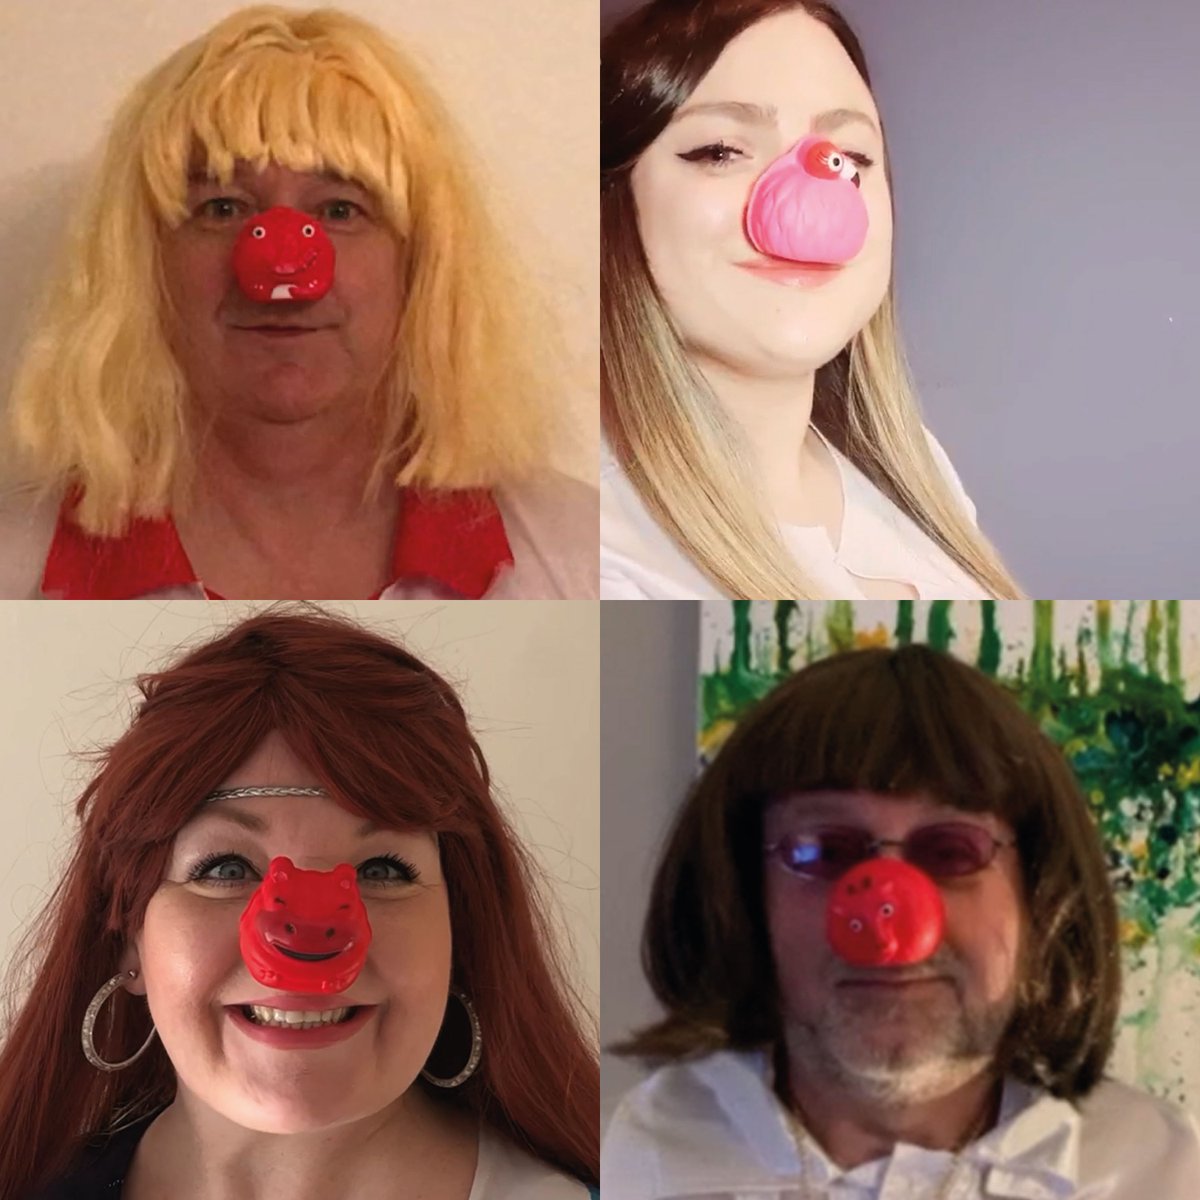 I said I wouldn't regret this as it was being daft for a good cause. The house band of @DalriadaTrustee, Run GMP, recorded Lay All your Love on Me for Red Nose Day. The video was a bit of fun. youtu.be/OCNxVOx2JnU @GmpRun #RedNoseDay2022